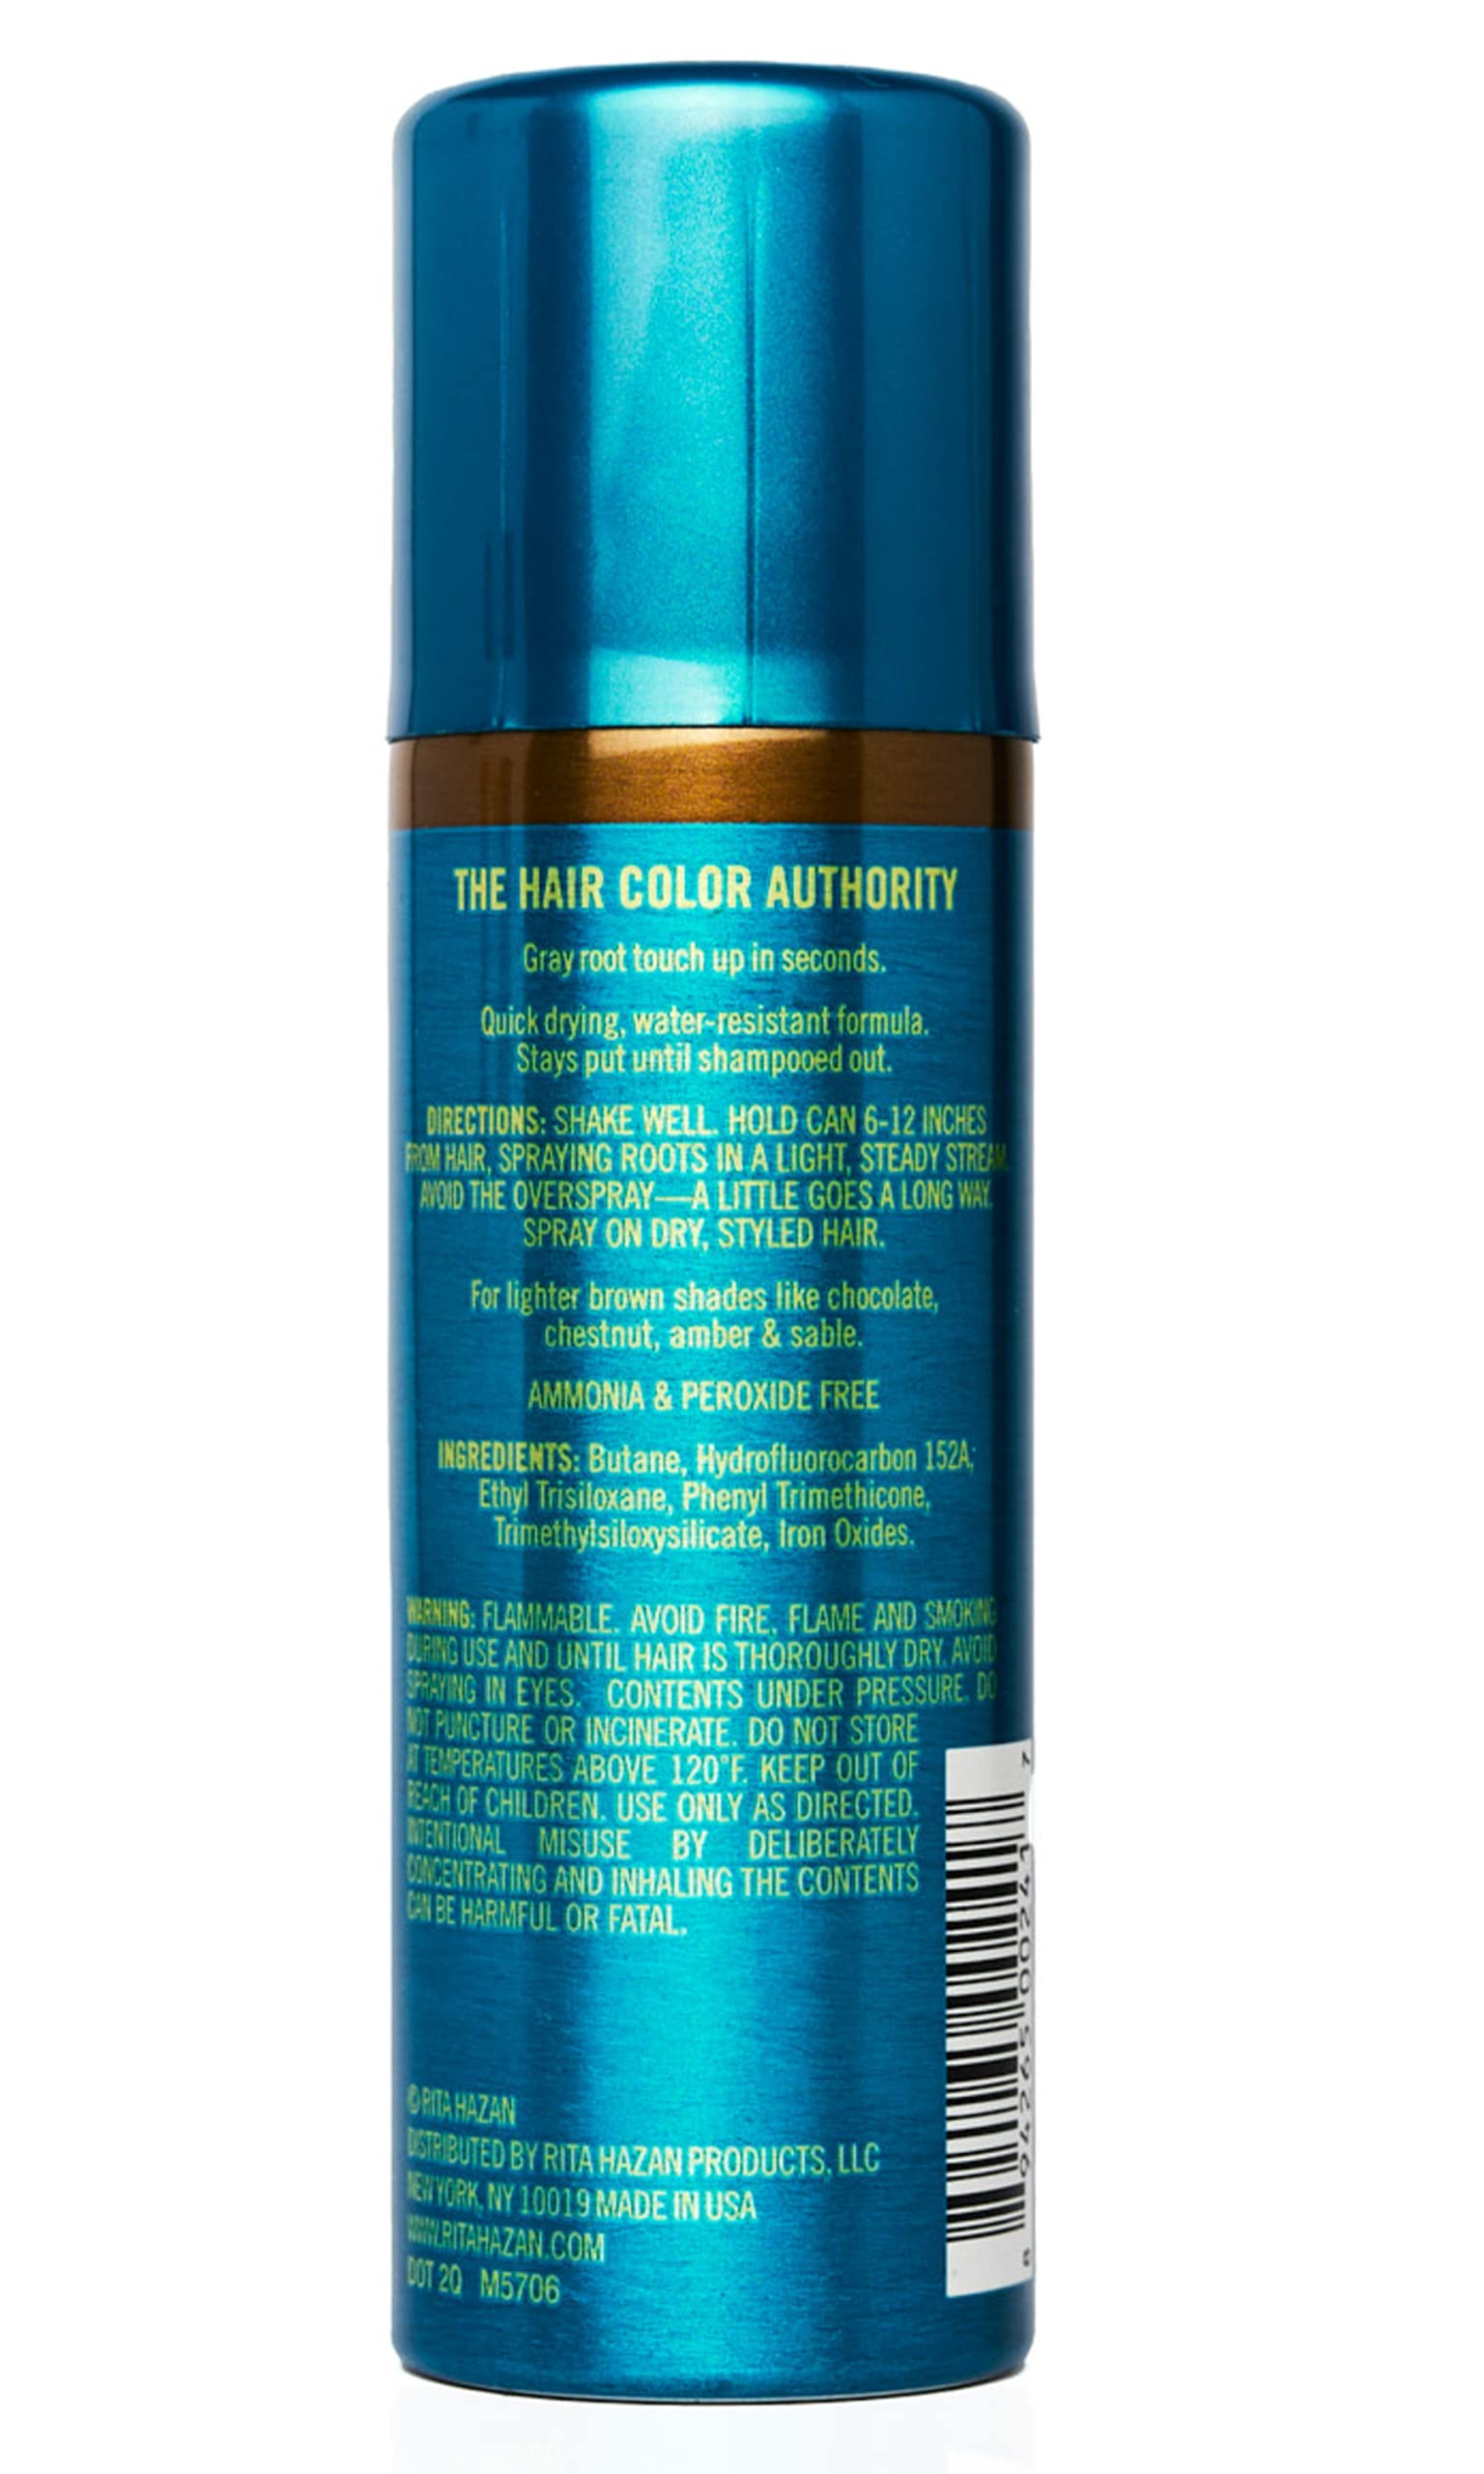 Rita Hazan Root Concealer Touch Up Spray - Instant Spray To Cover Up Roots - Quick Drying, Water-Resistant Formula - Temporary Hair Color Spray for Gray Roots - 2 oz. Root Spray